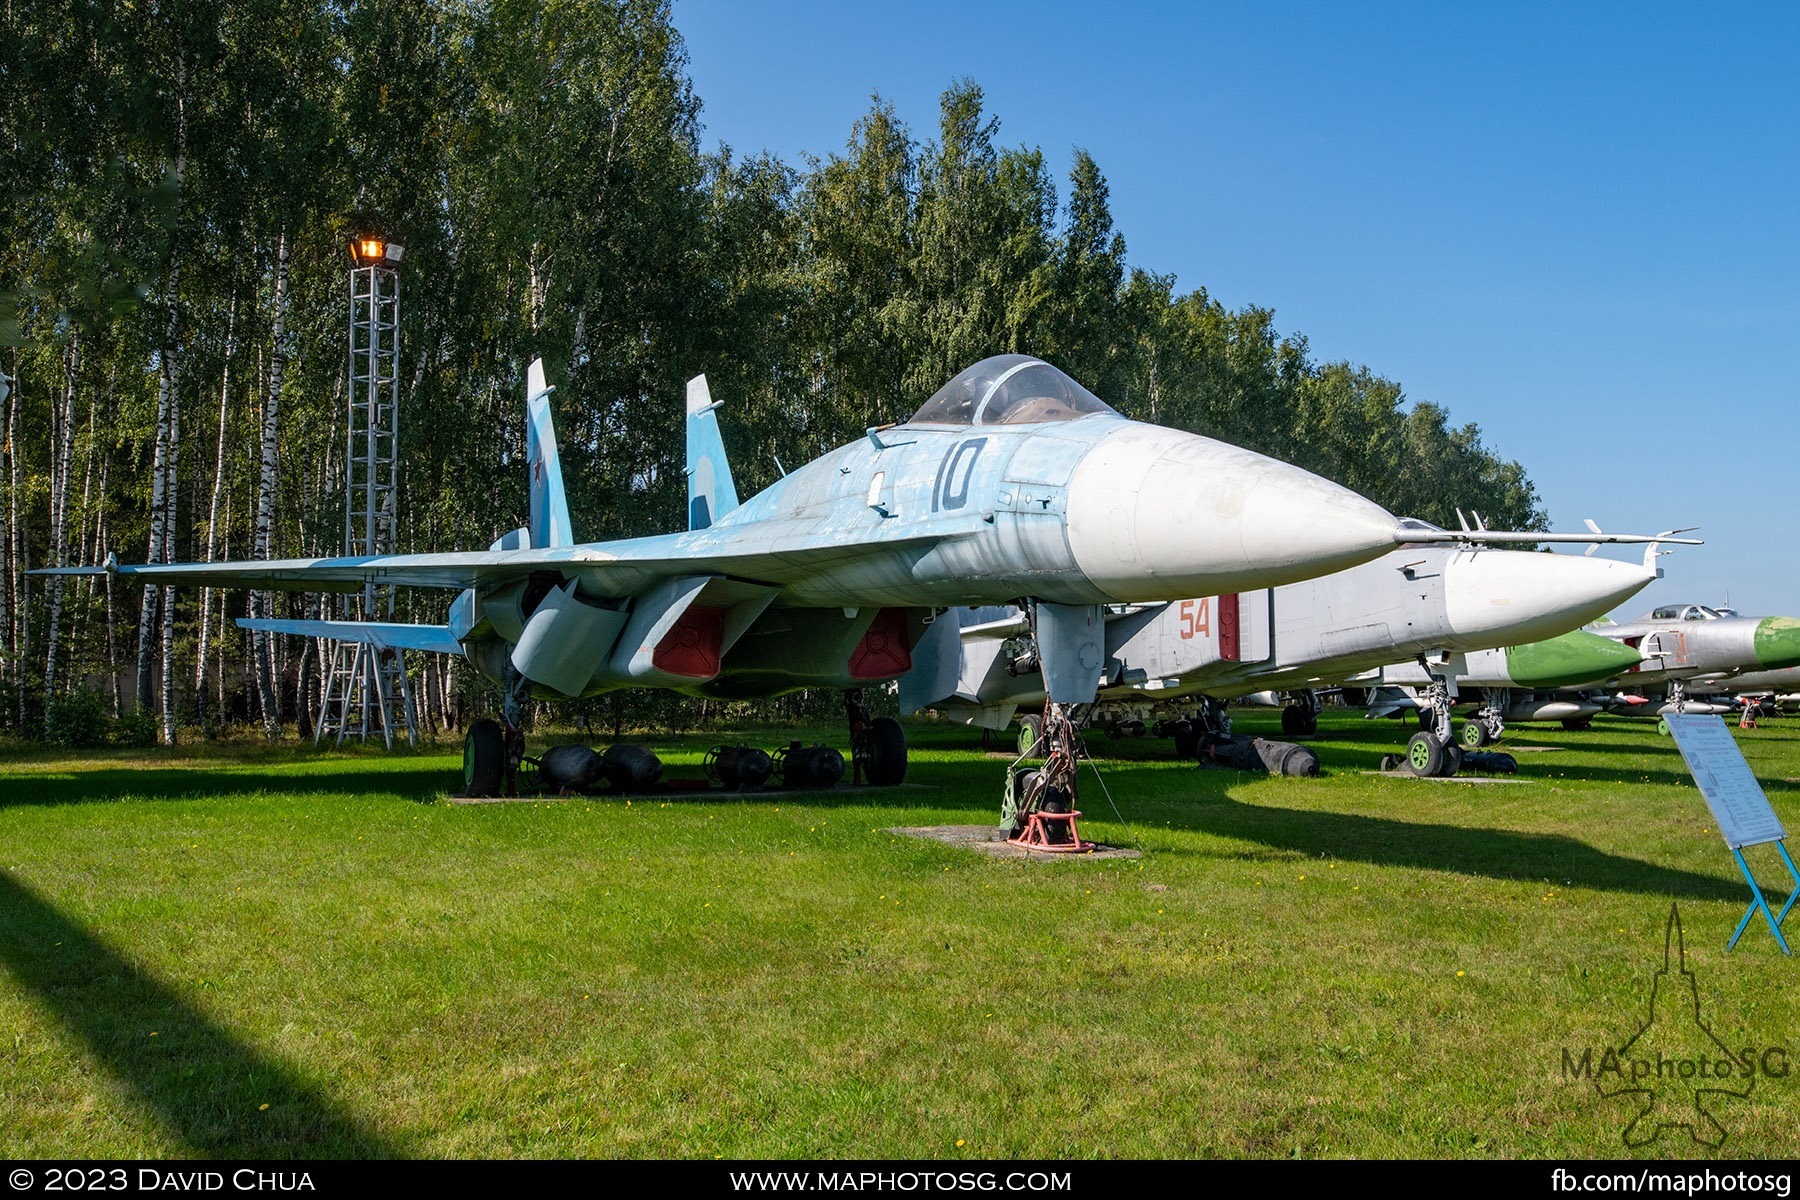 Prototype of the Su-27 T-10-1 fighter